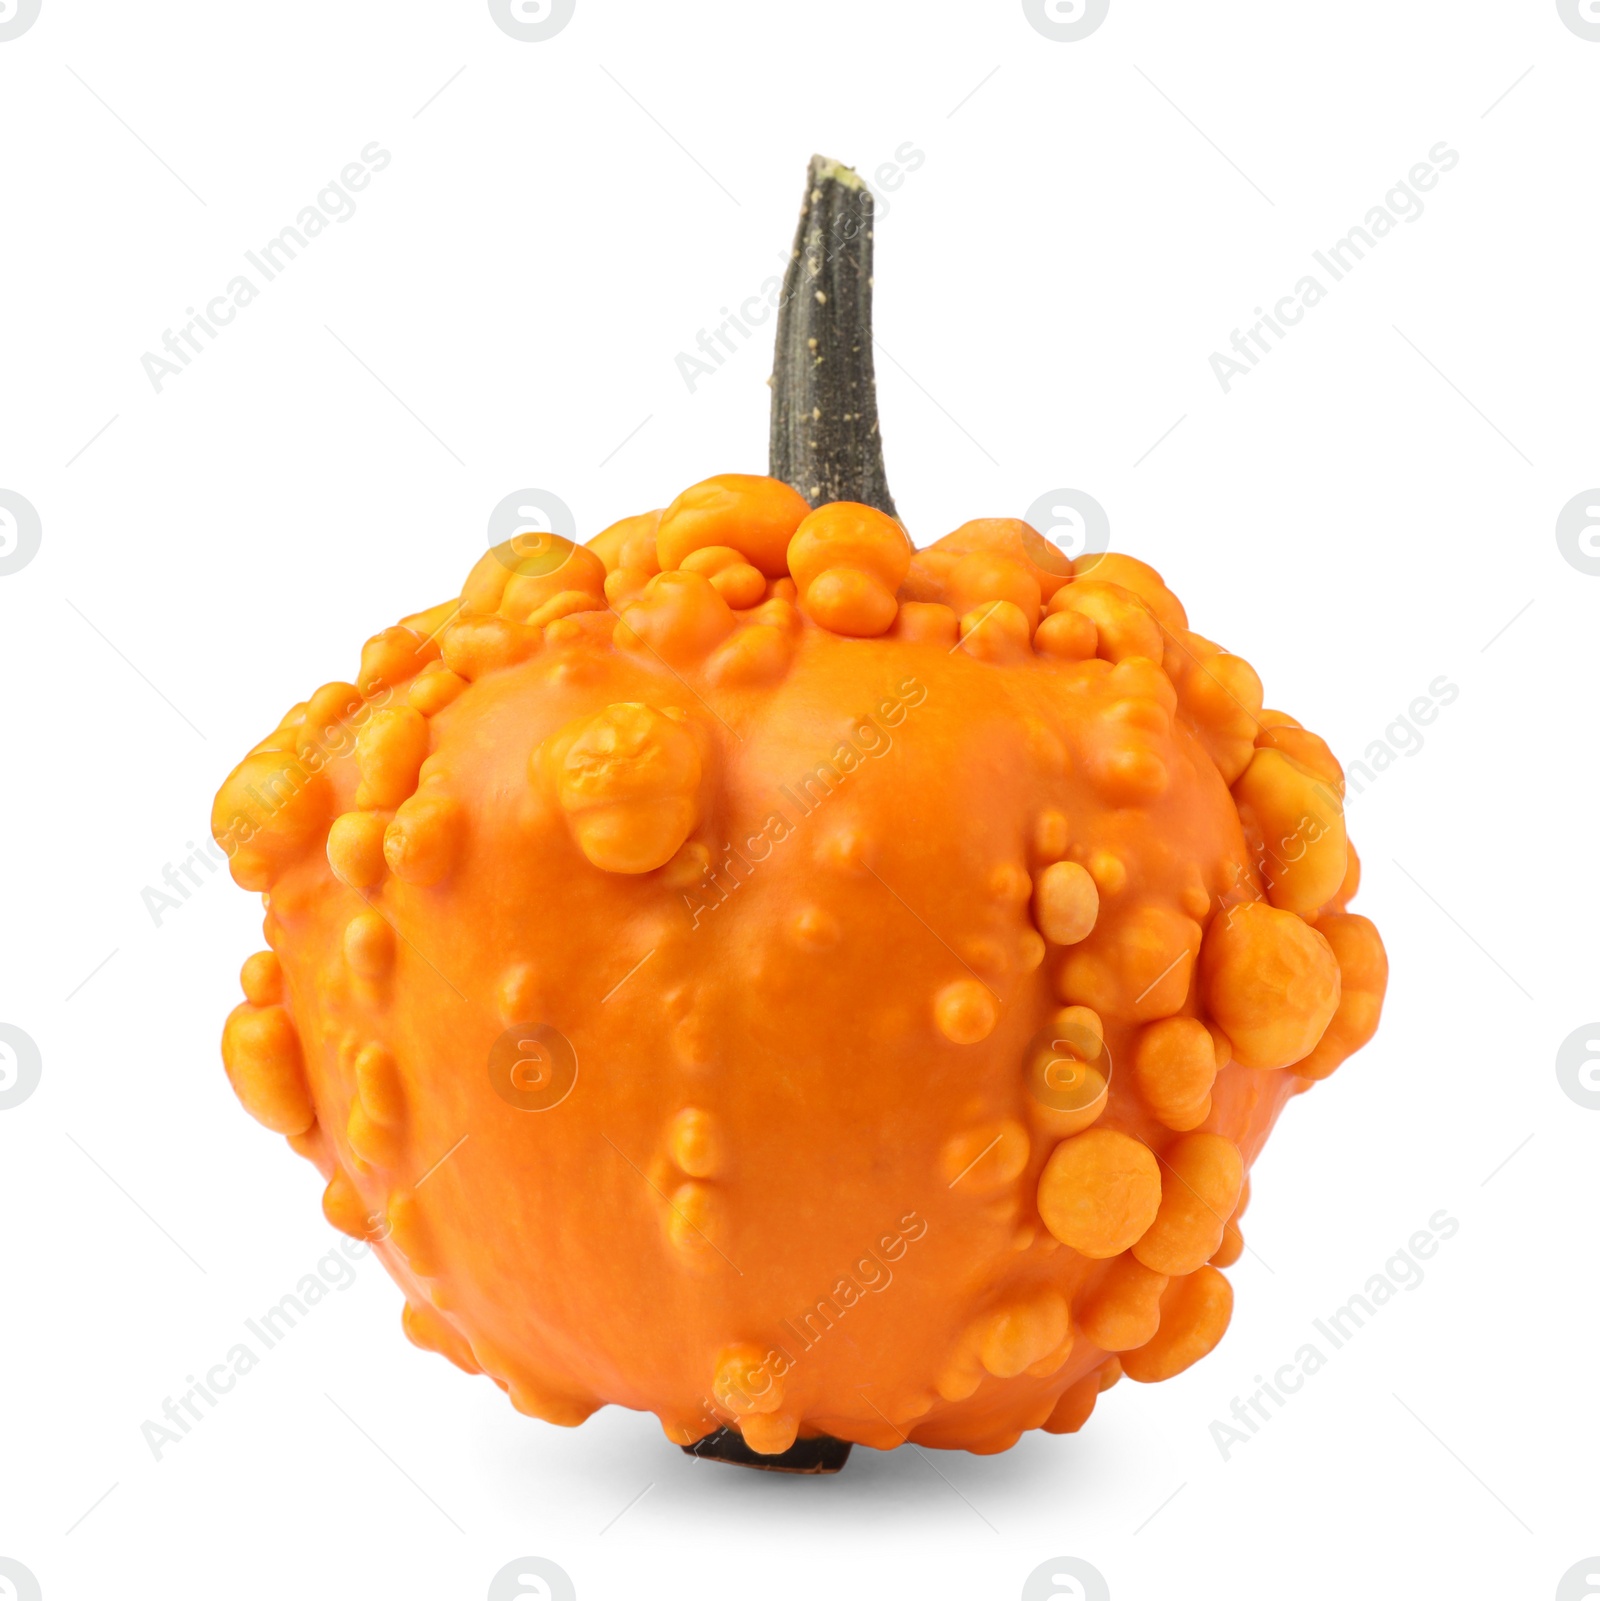 Photo of One whole ripe pumpkin isolated on white